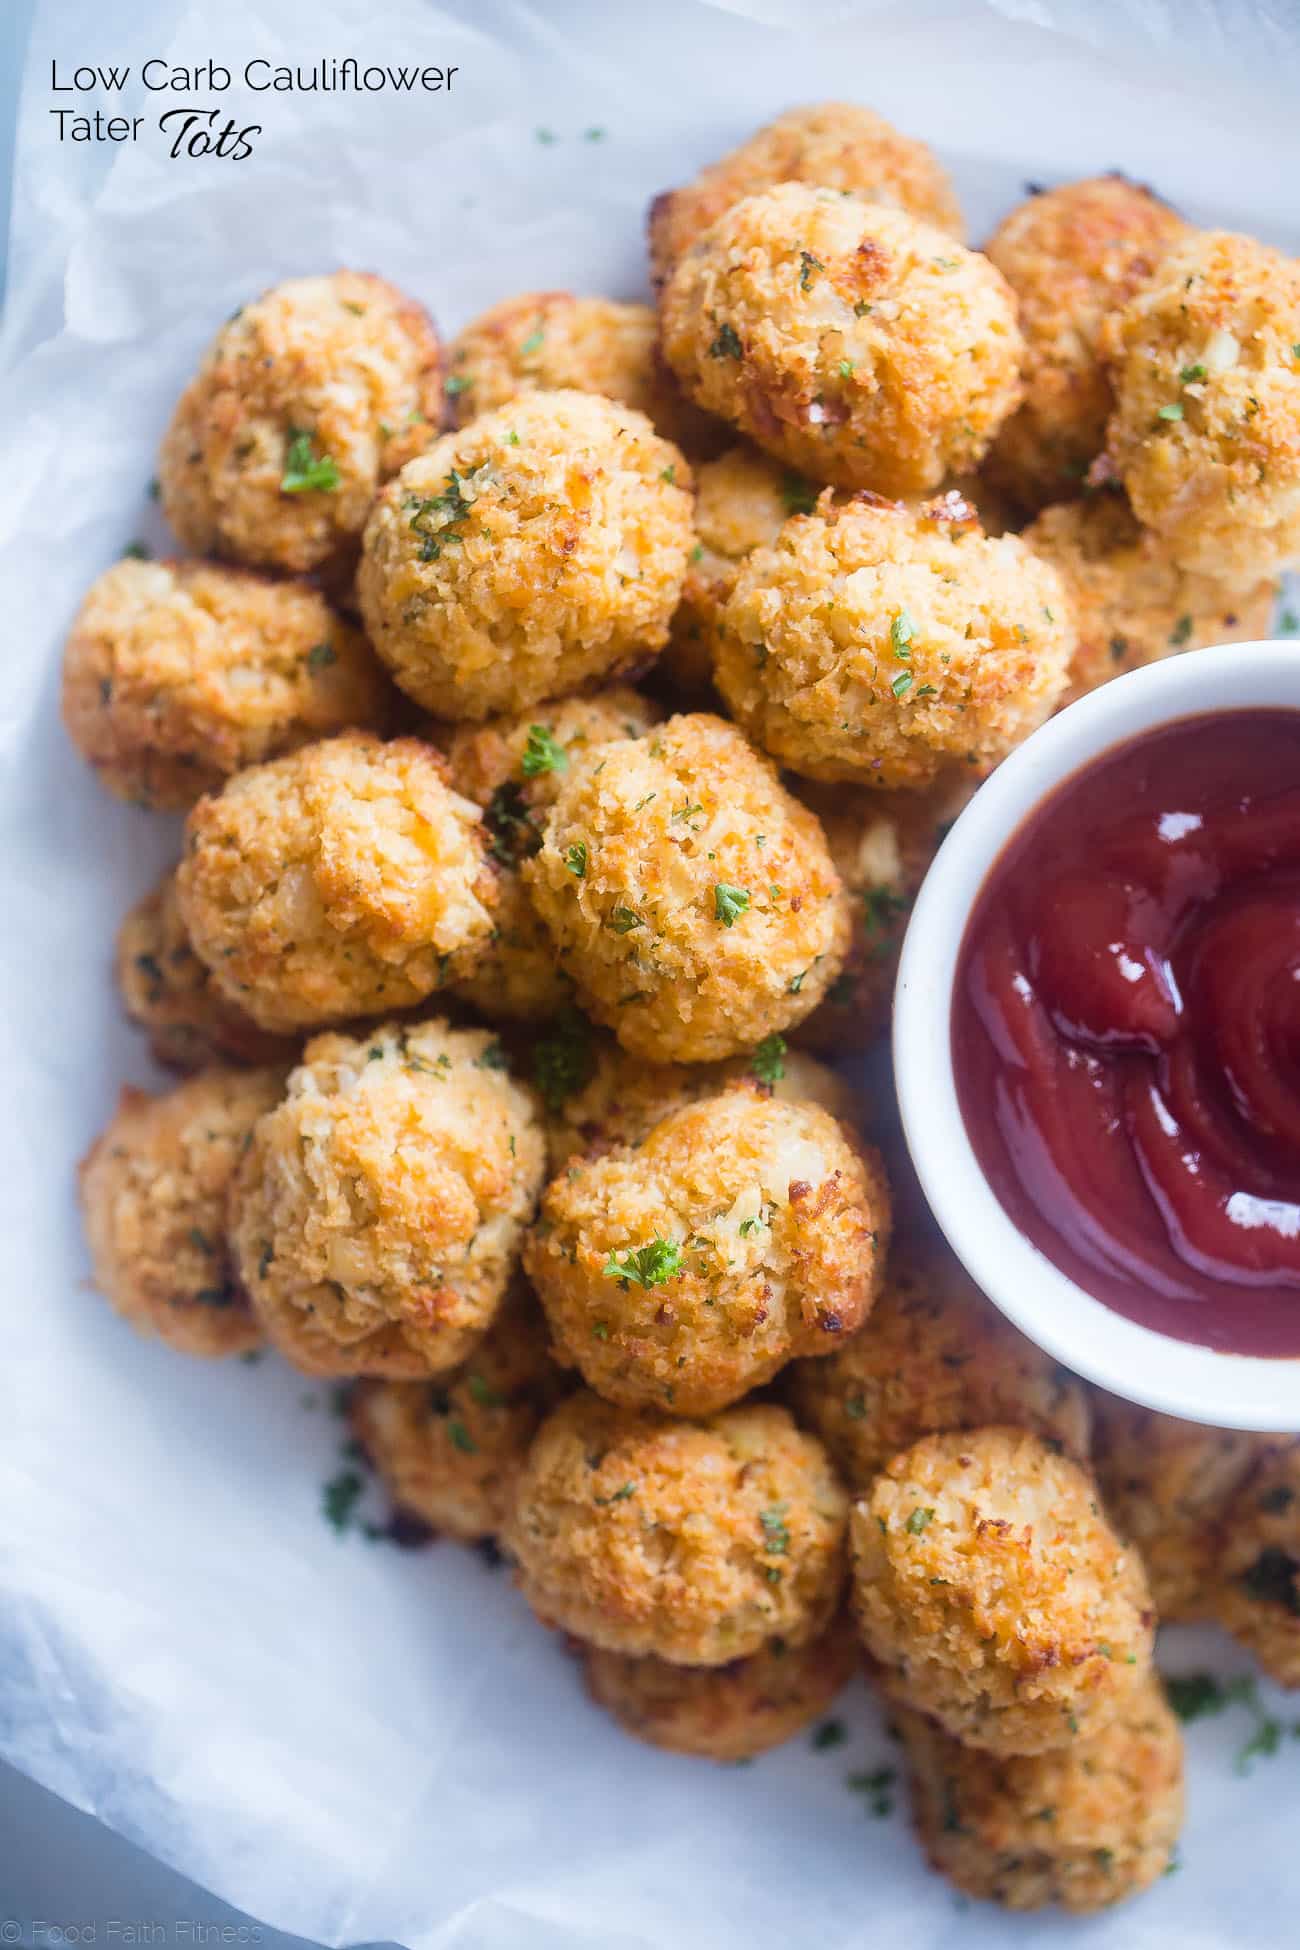 How to Make Cauliflower Tater Tots - Ever wondered how to make low carb cauliflower tater tots? Learn two easy ways – a paleo and cheesy version – to make your favorite treat healthy, gluten free and grain free!  | Foodfaithfitness.com | @FoodFaithFit